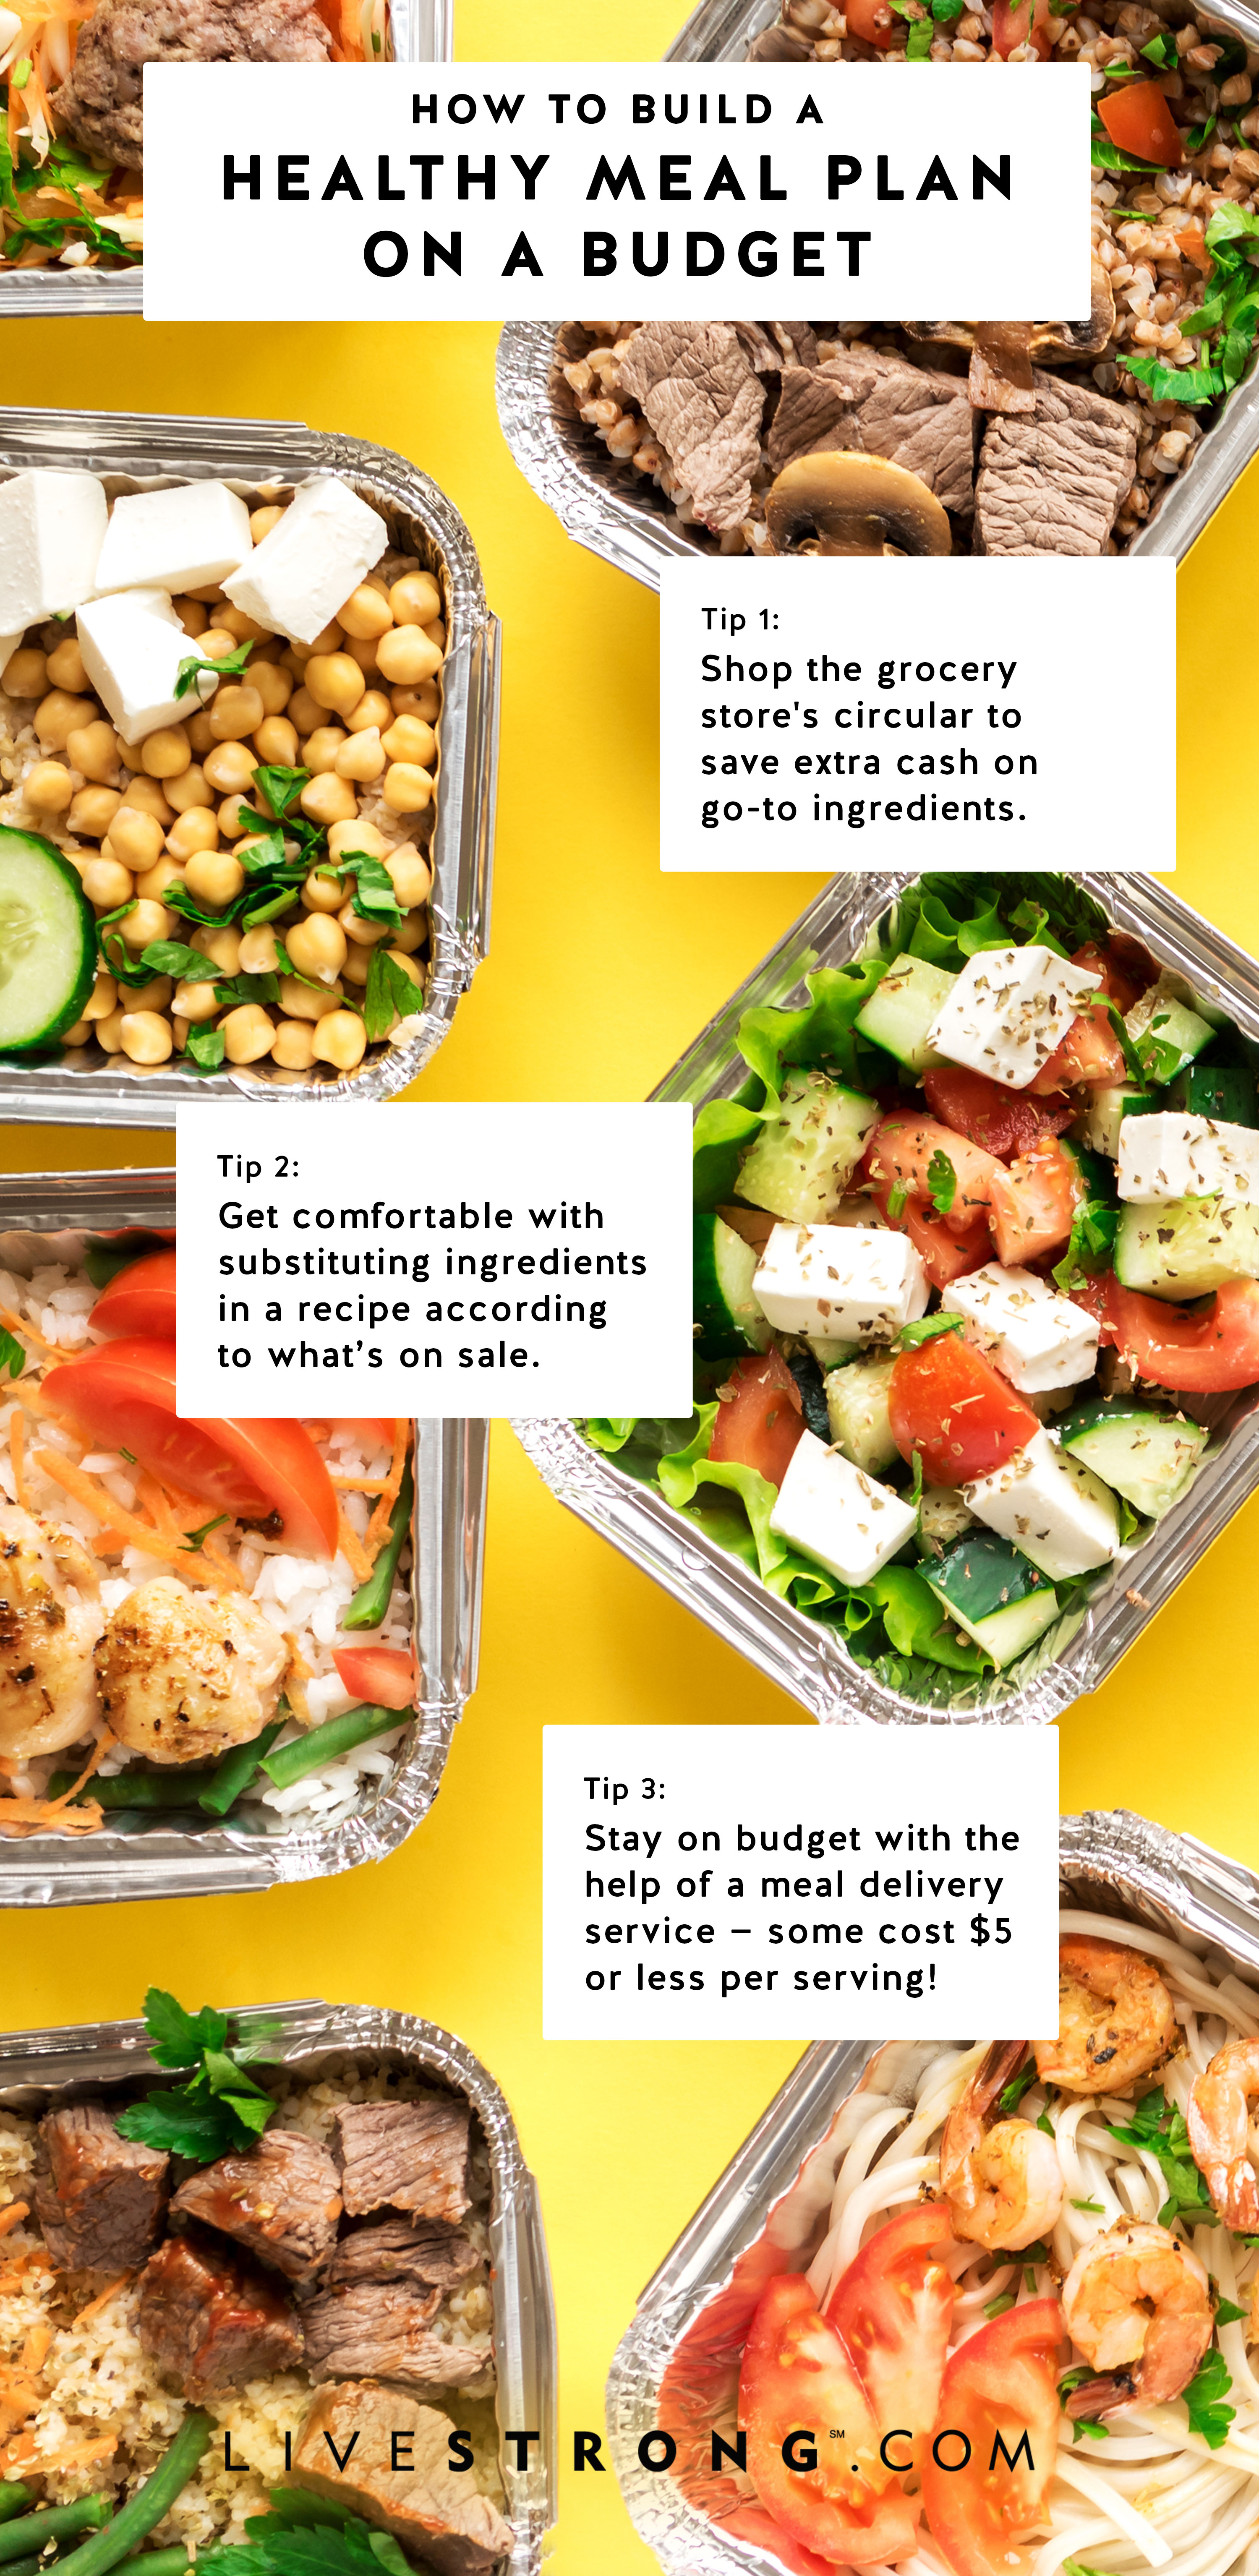 Reduced-cost specialty diet meal plans